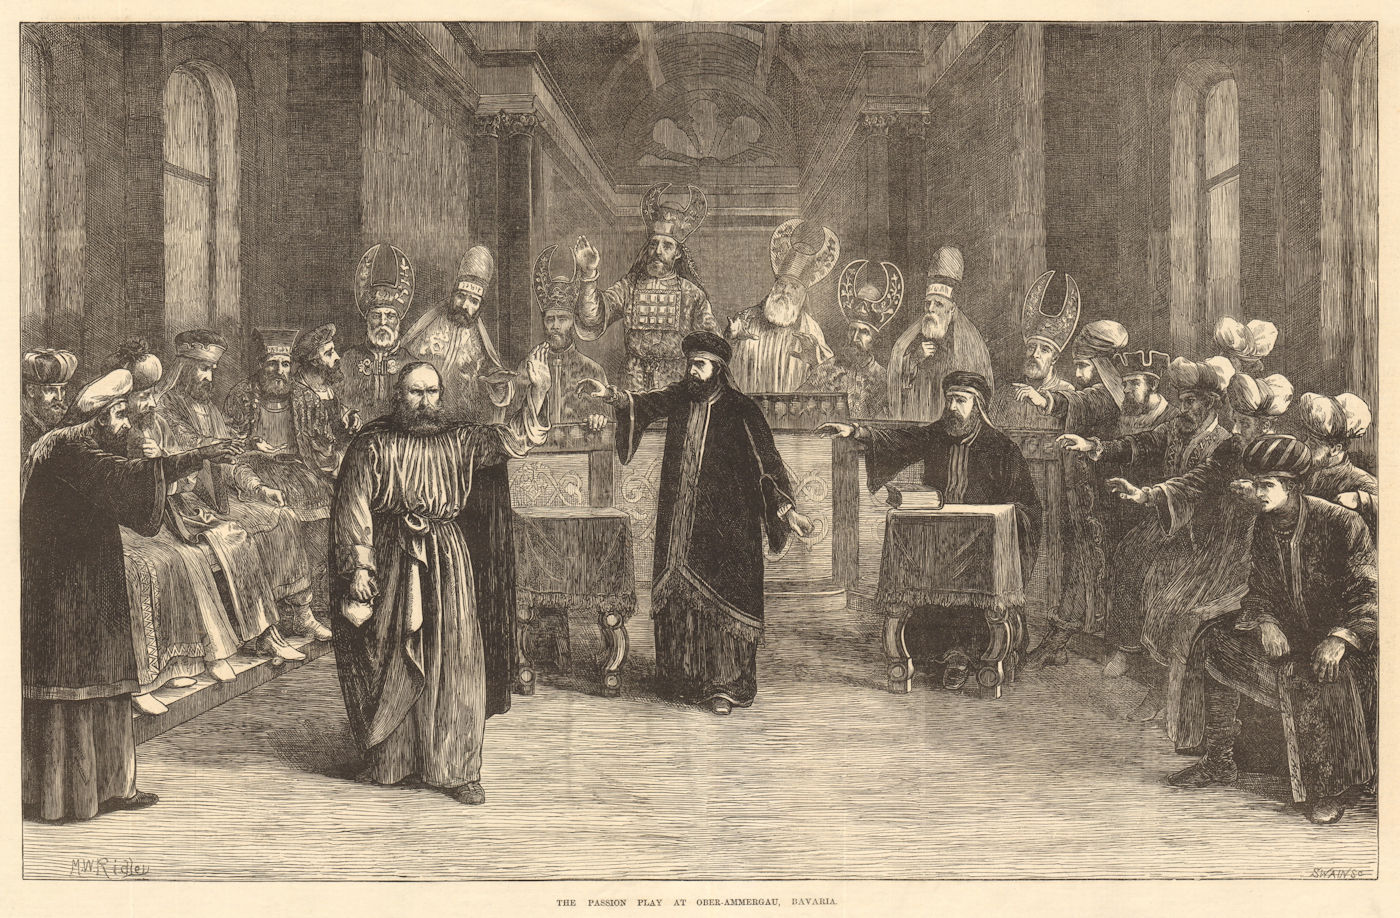 Associate Product The passion play at Ober-Ammergau, Bavaria. Germany 1871 antique ILN full page